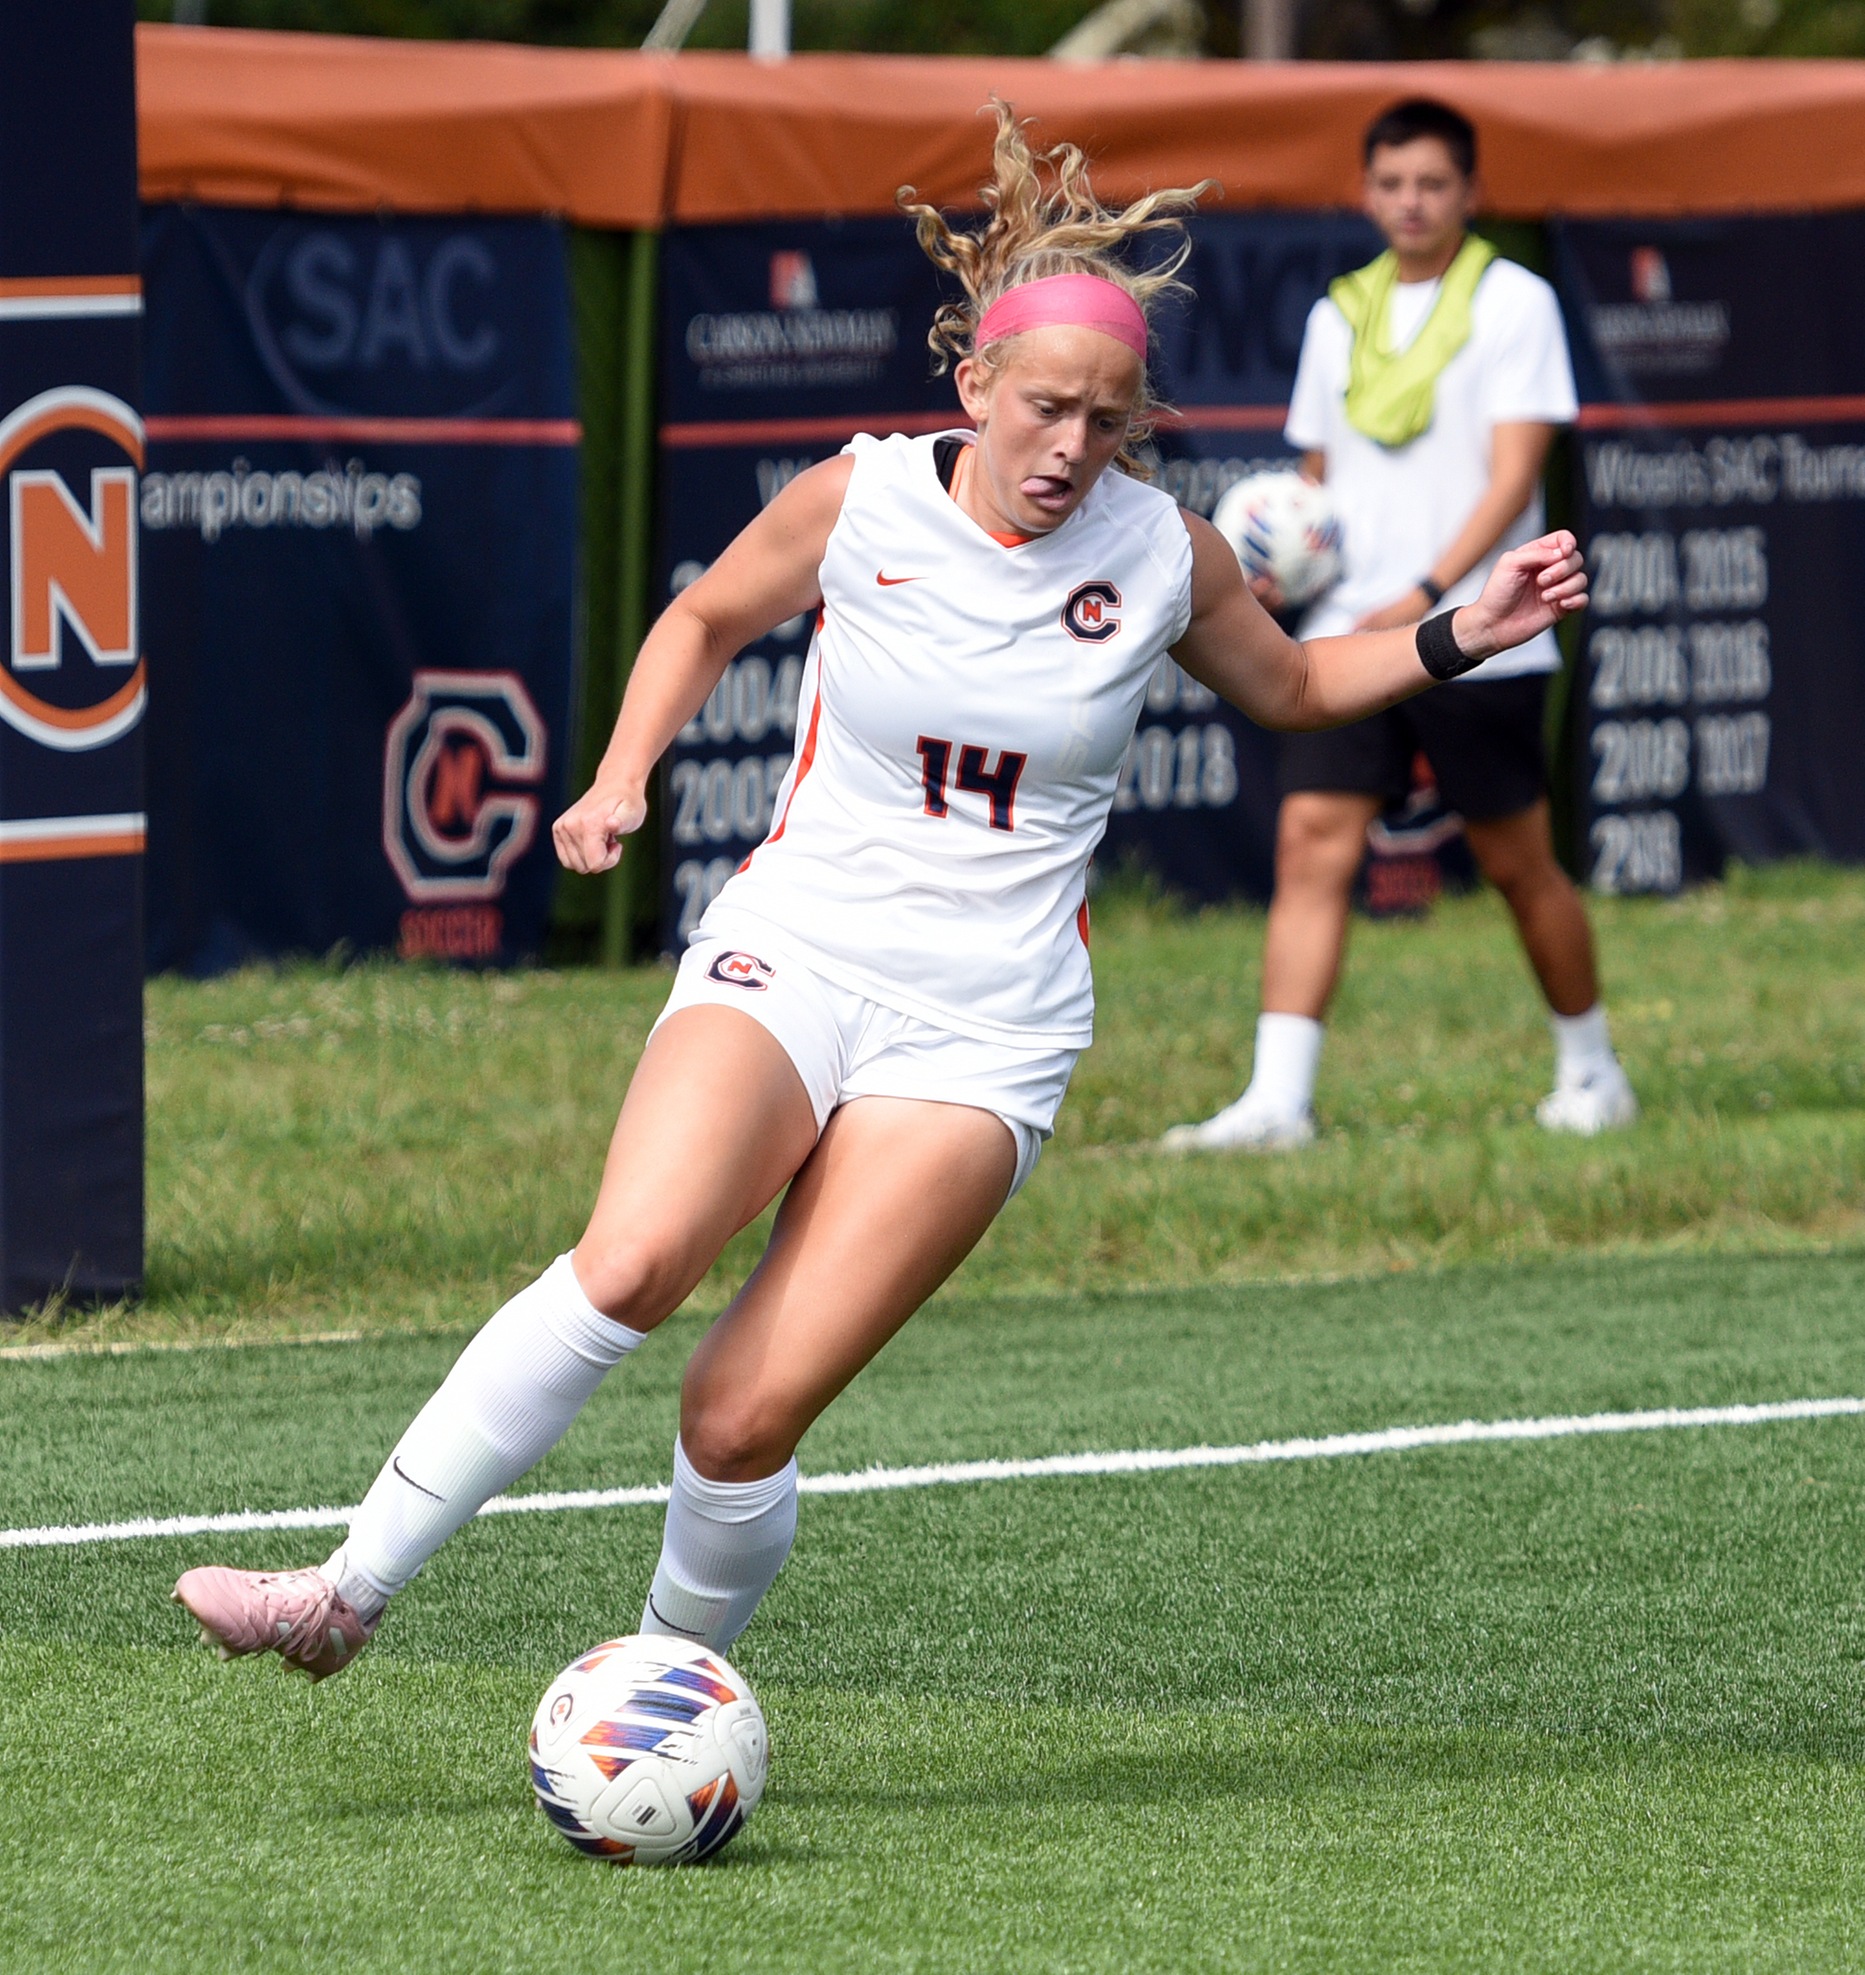 Eagles eye first conference win at Wingate